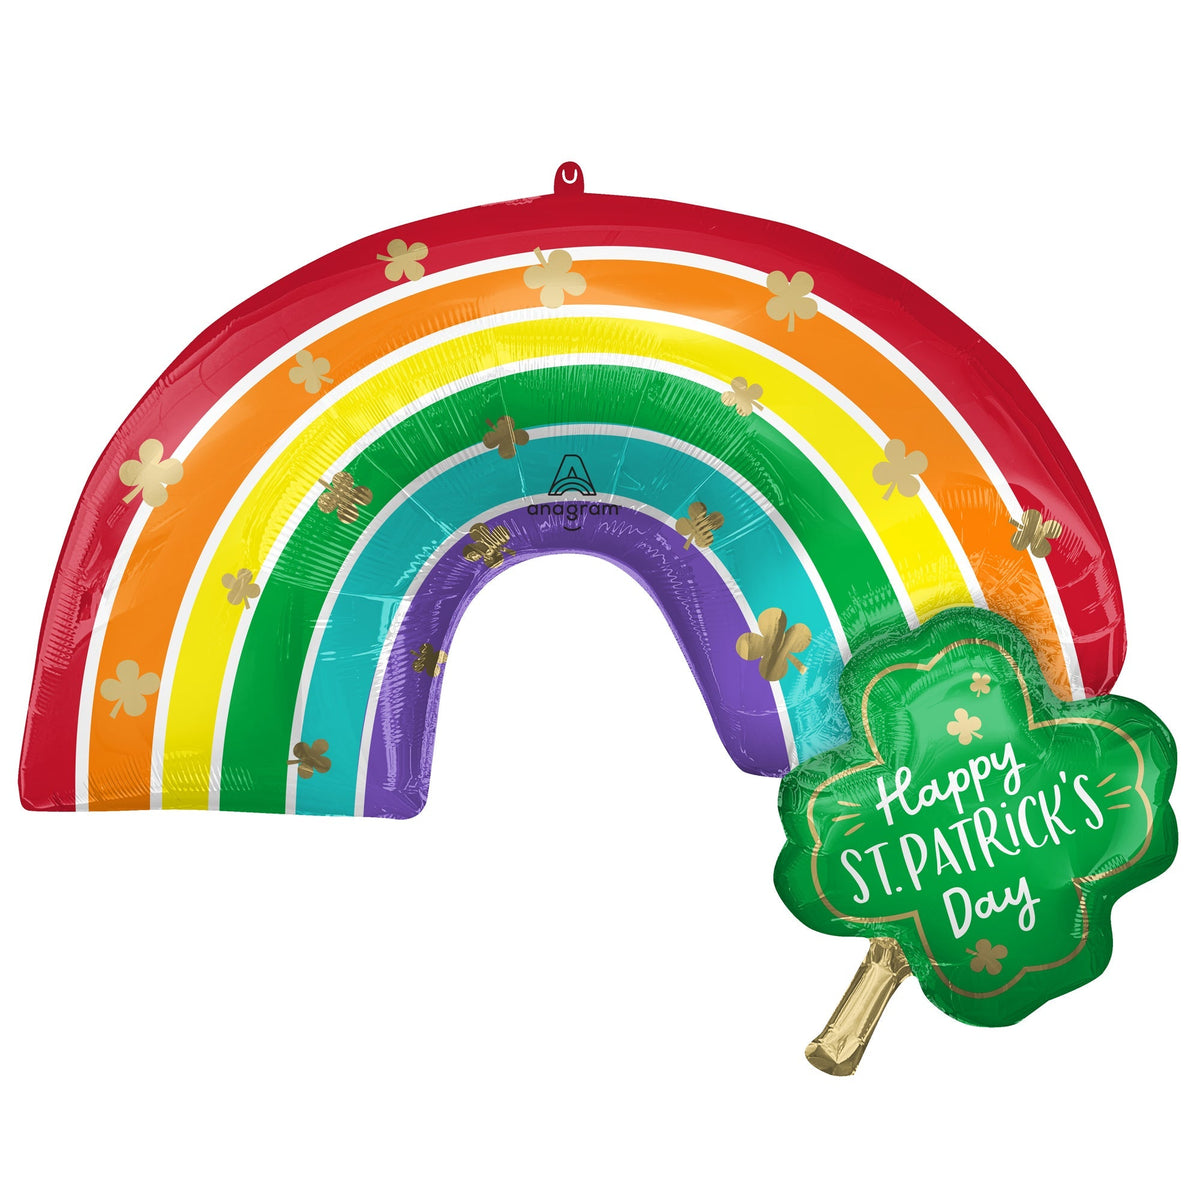 LE GROUPE BLC INTL INC Balloons Saint-Patrick's Day Supershape Rainbow and Four-Leaf Clover Foil Balloon, 33 Inches, 1 Count